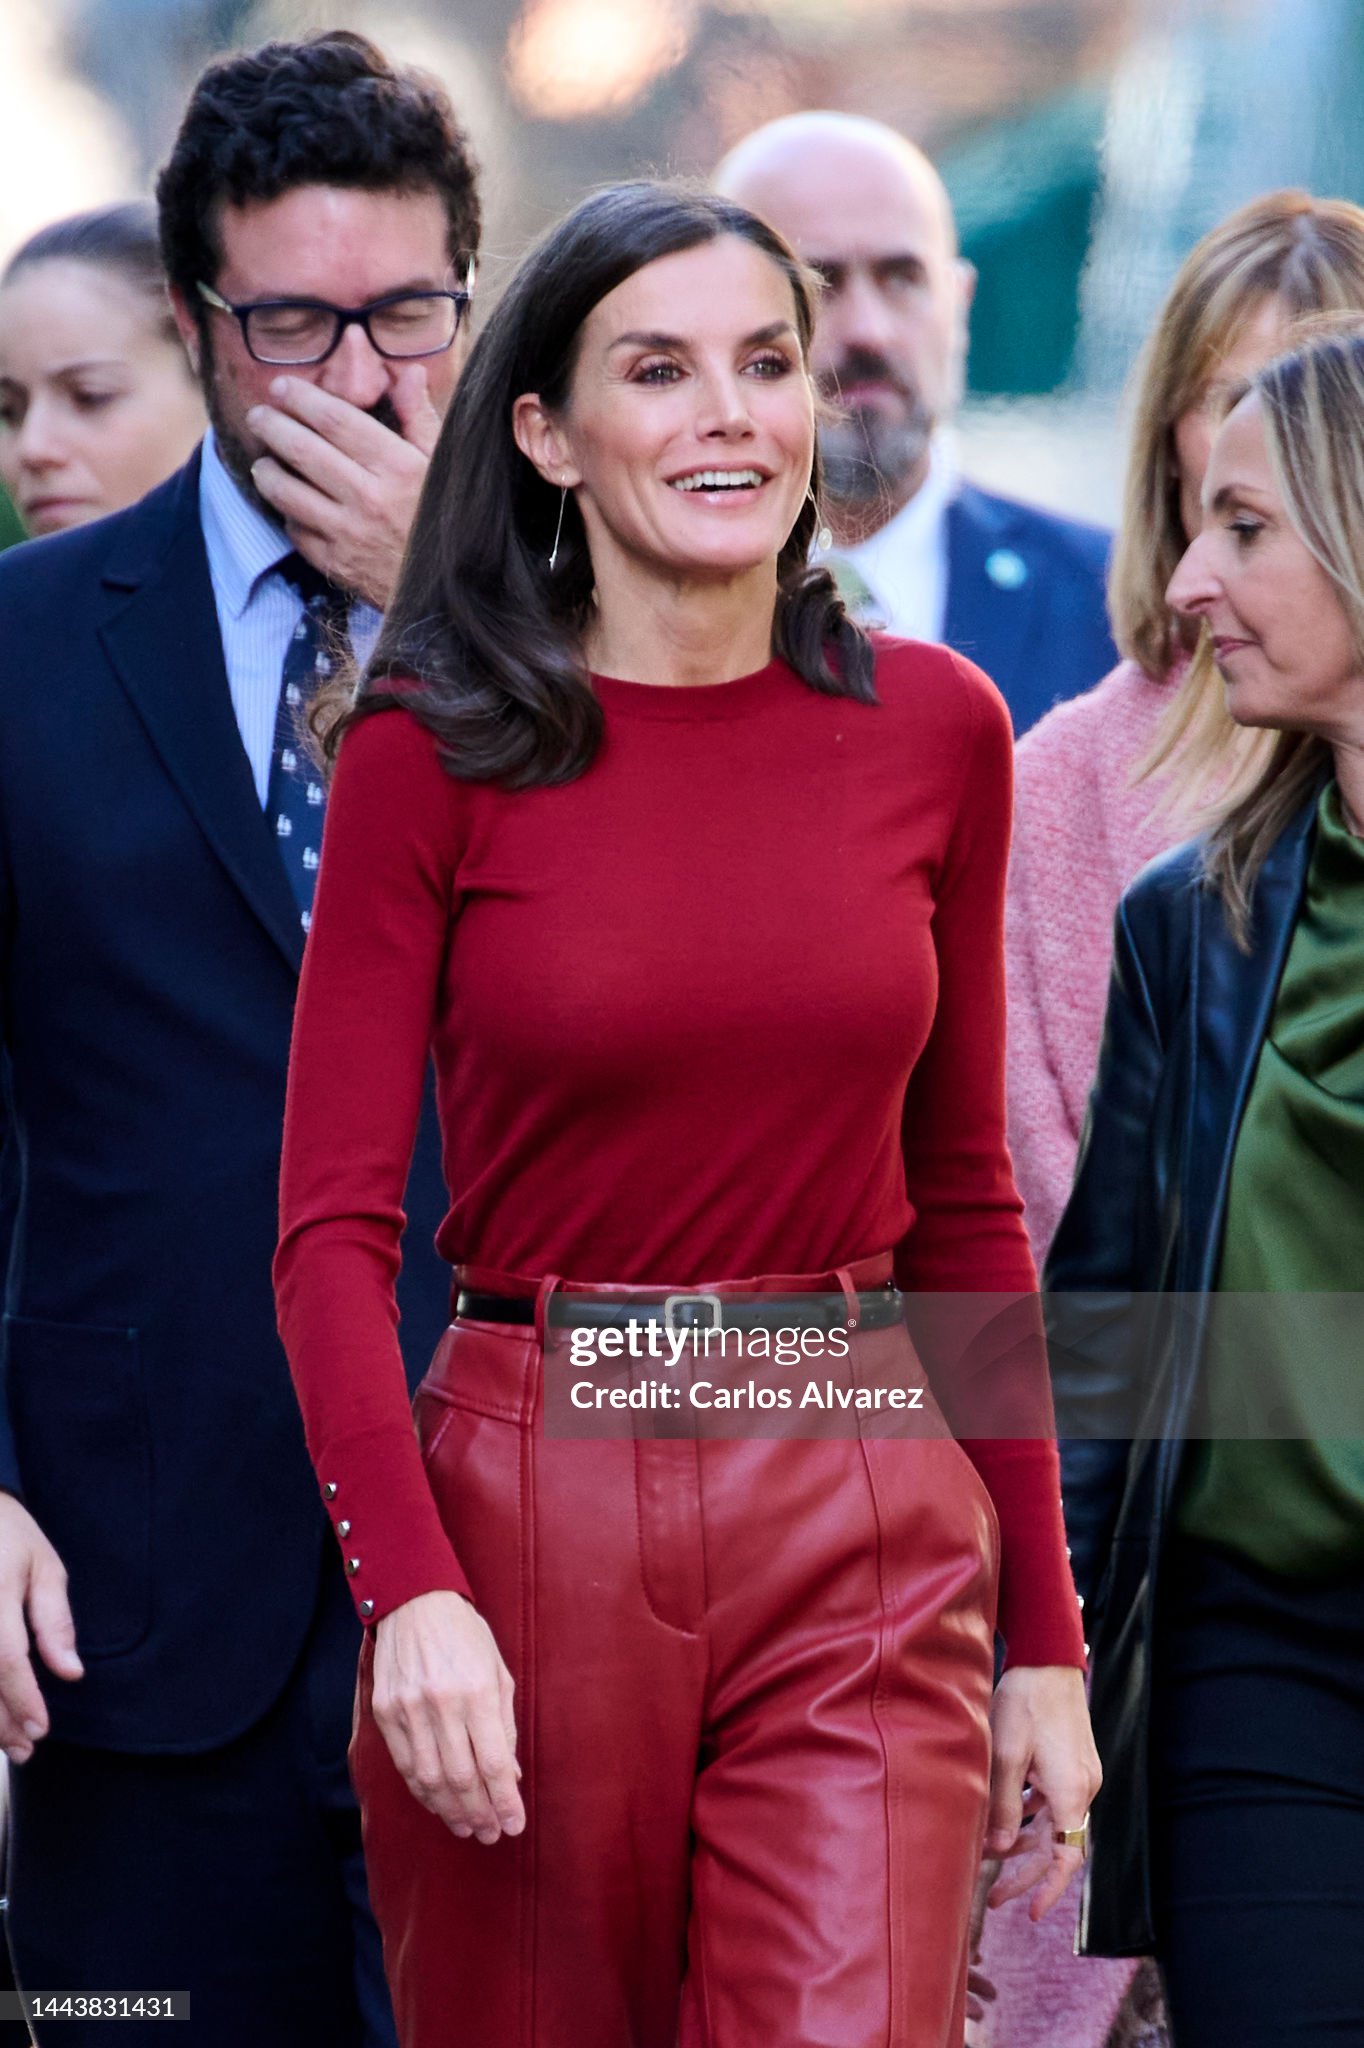 queen-letizia-of-spain-attends-events-related-to-mental-health-and-intellectual-disabilities.jpg?s=2048x2048&w=gi&k=20&c=YlhdCvZvYSkF9_K-Y-wizGd_U6Vrn7kfd03tWgp2nkU=